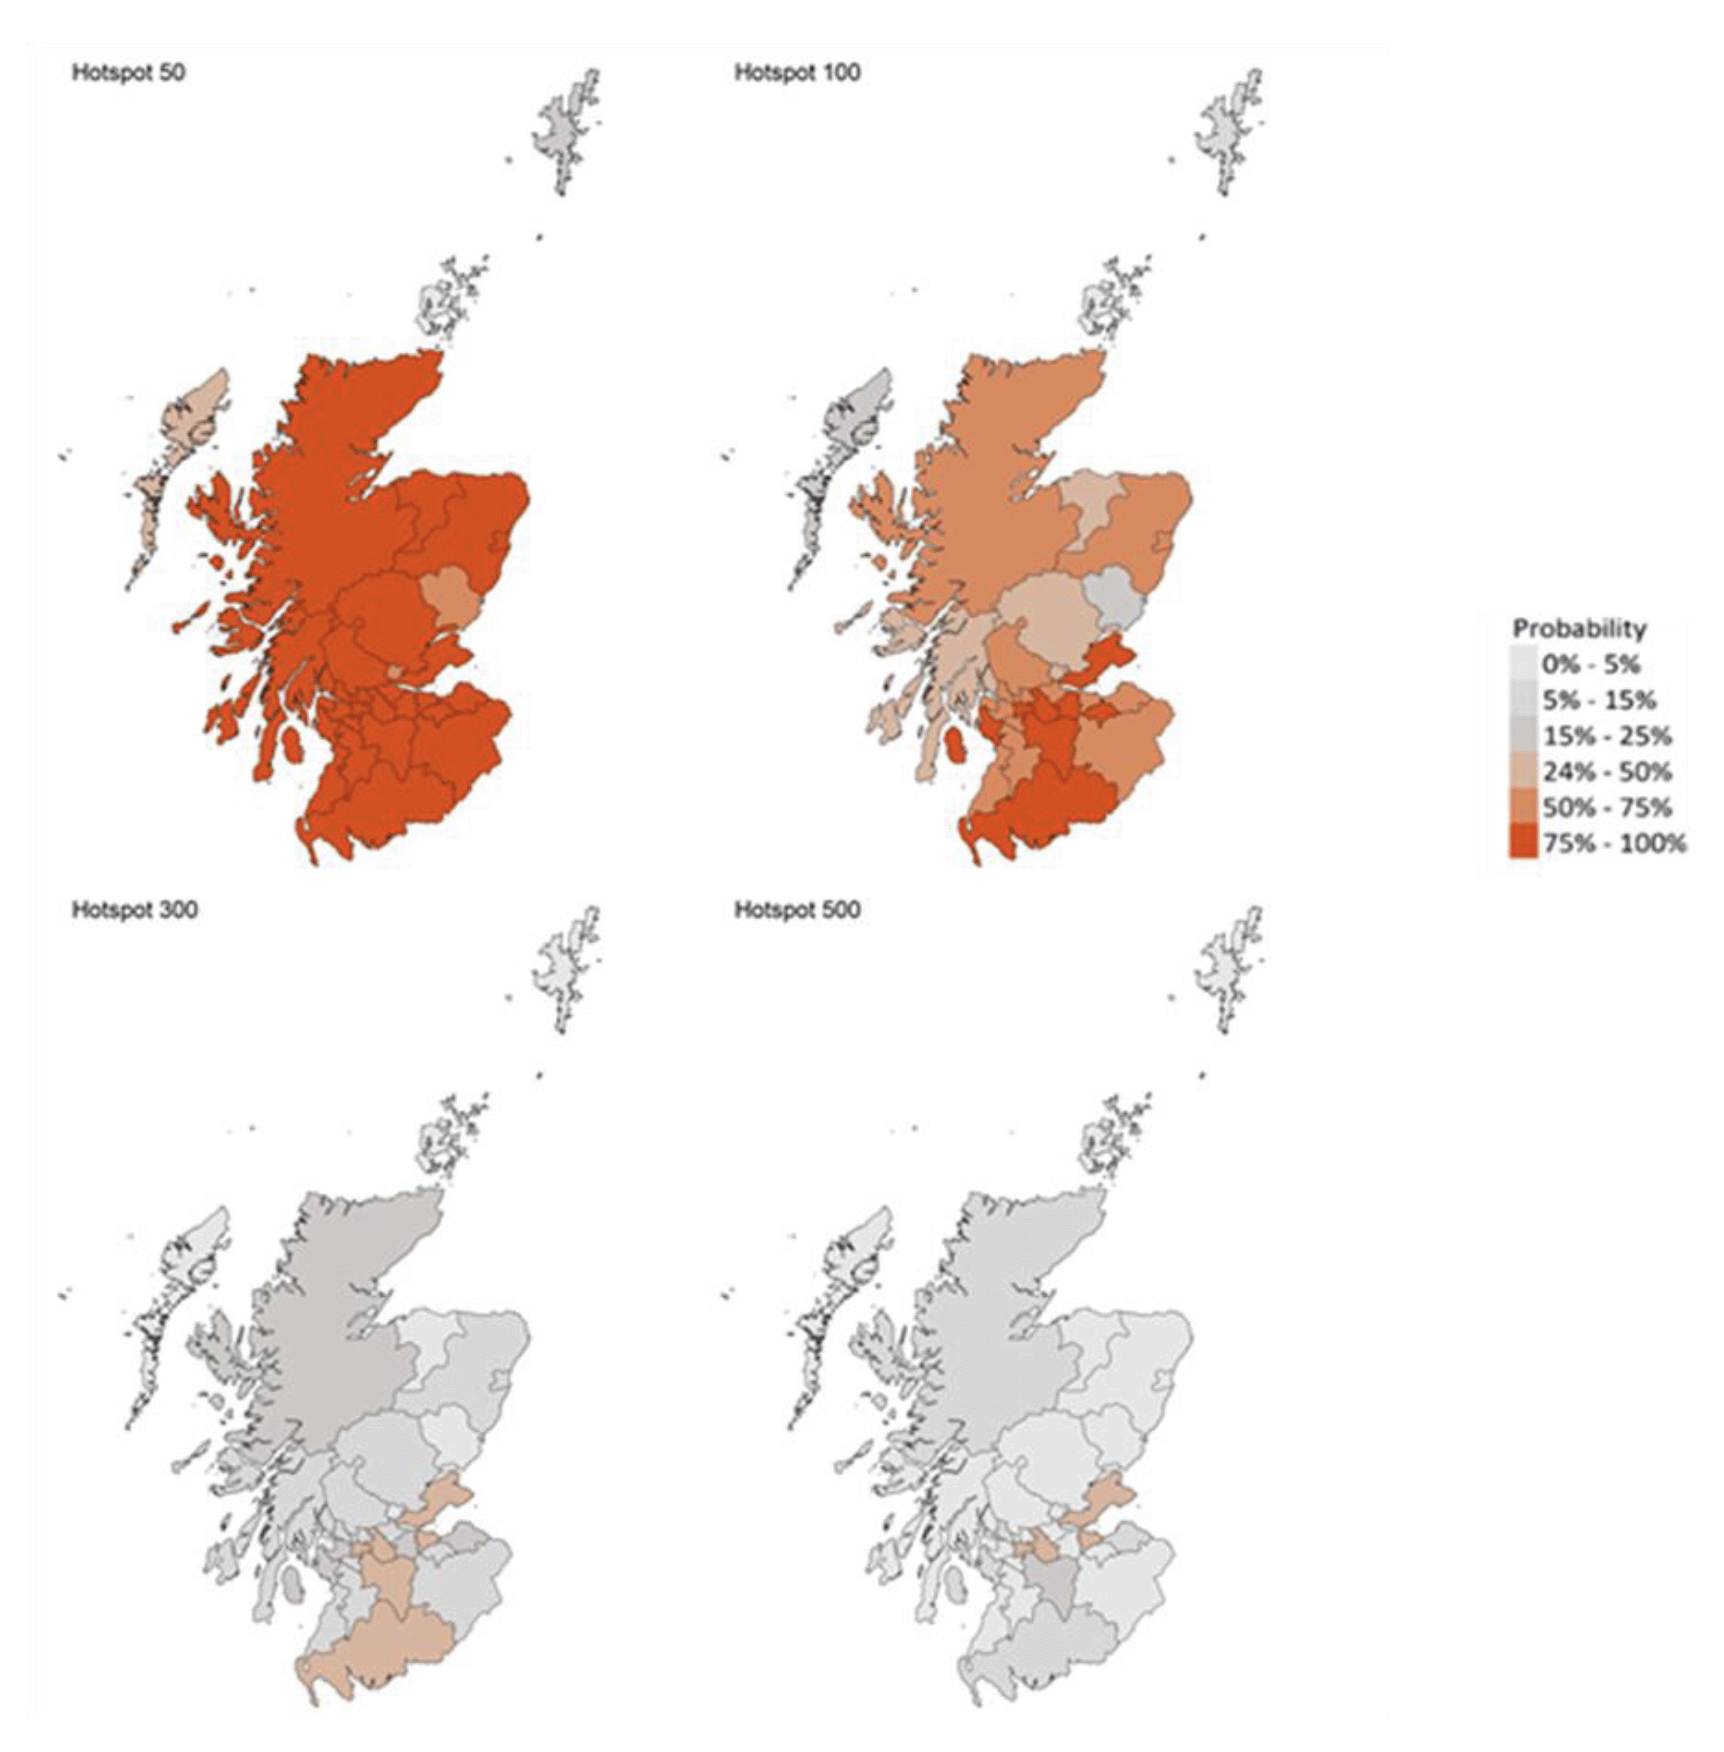 These four colour coded maps of Scotland show the probability of Local Authorities having more than 50, more than 100, more than 300, and more than 500 cases per 100,000 population. The colours range from light grey for a 0 to 5 percent probability, through dark grey, light orange, dark orange to red for a 75 to 100 percent probability. 
These maps show that there are 27 local authorities that have at least a 75% probability of exceeding 50 cases per 100,000 population. Of those, eight are expected to exceed 100 cases per 100,000 with at least a 75% probability.
